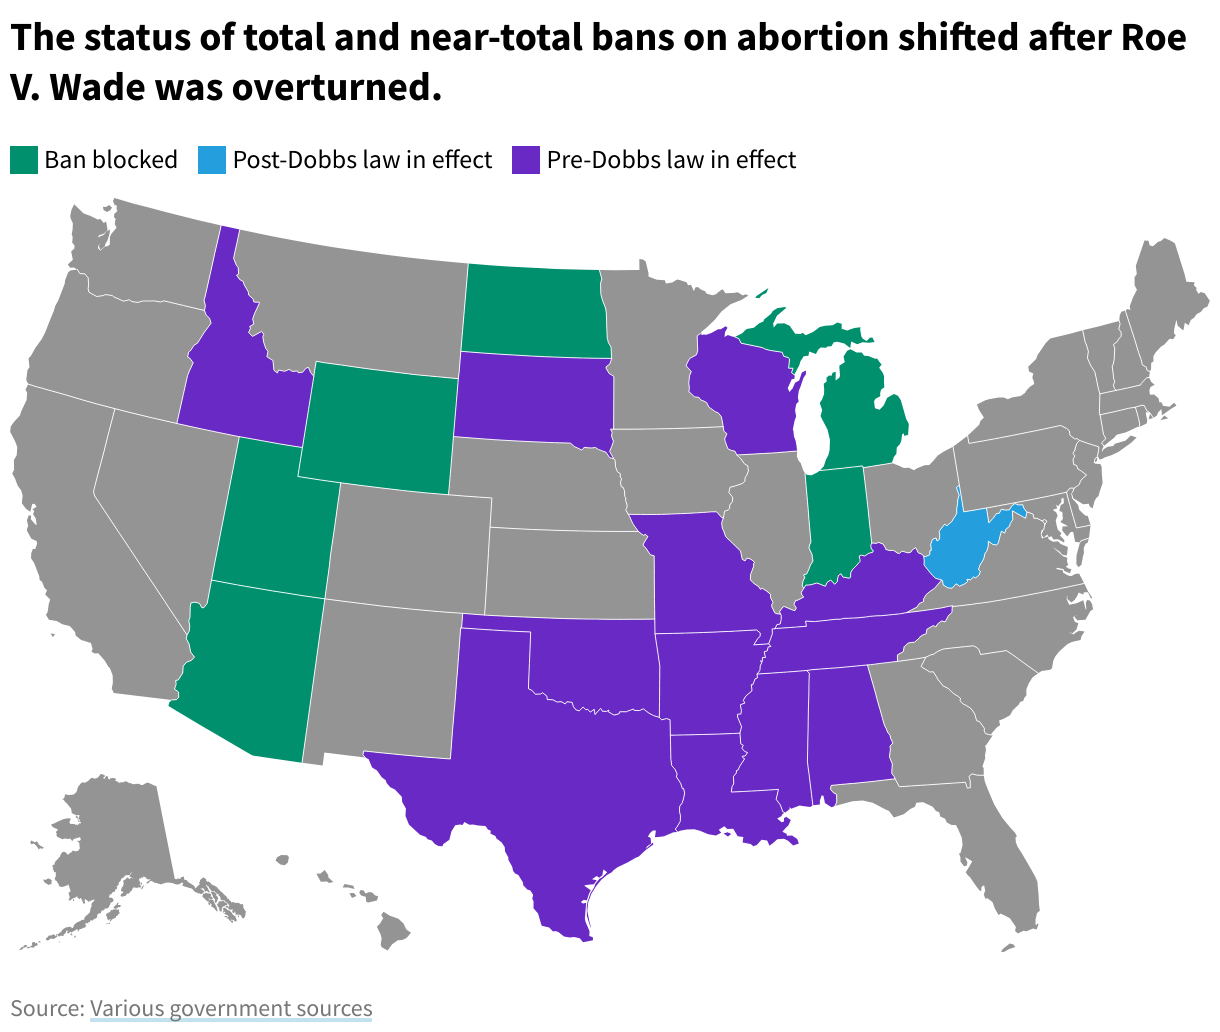 Two states have near-total or total abortion bans blocked in the courts. Fourteen states have Pre-Dobbs abortion bans in effect. And two states have post-Dobbs abortion bans in effect.